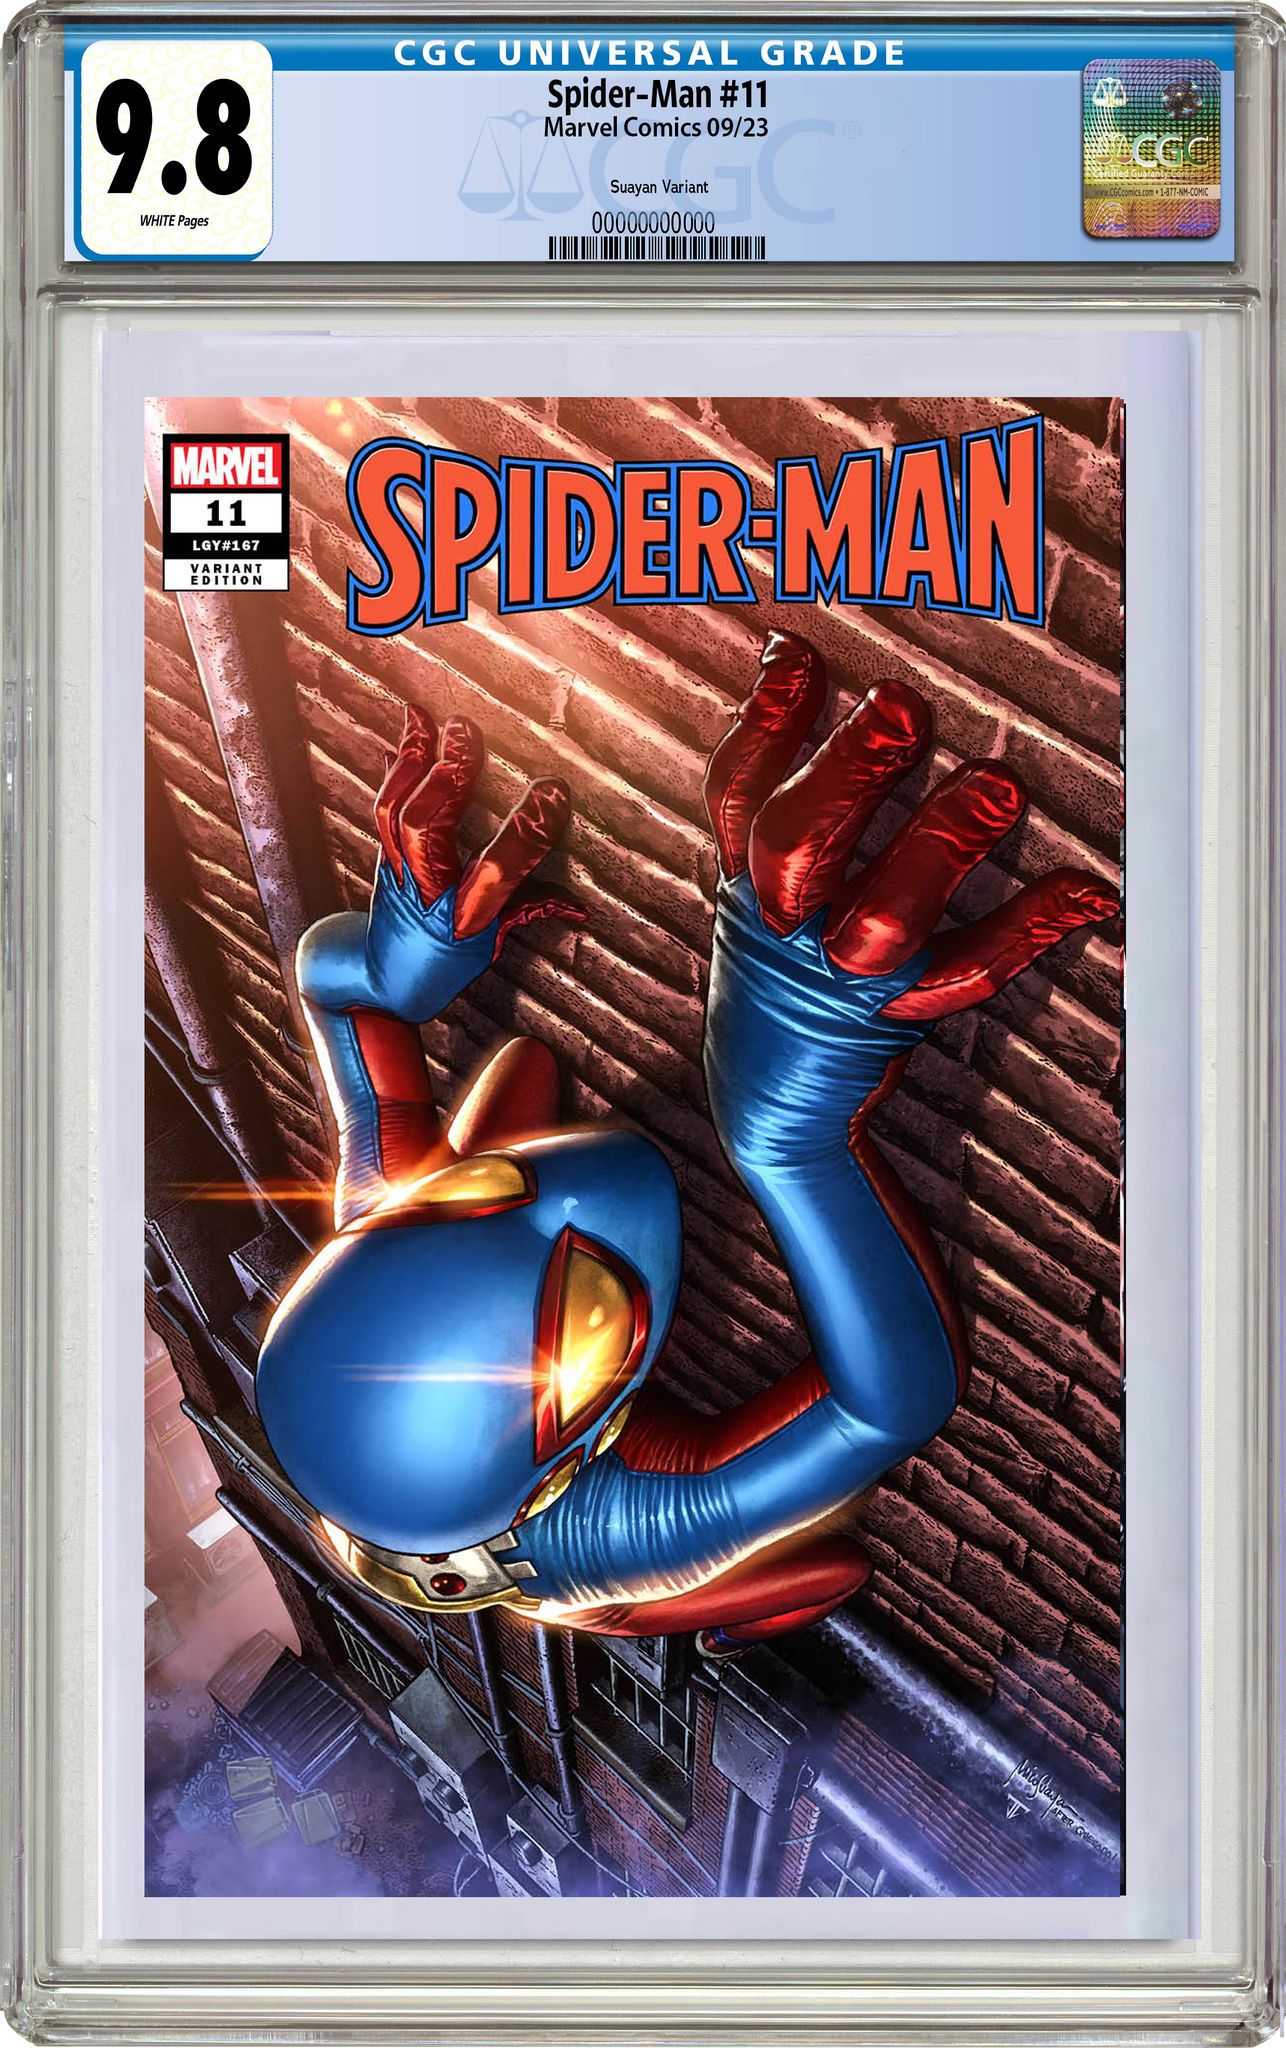 SPIDER-MAN 11 MICO SUAYAN EXCLUSIVE VARIANT COVER OPTIONS - 08/16/23